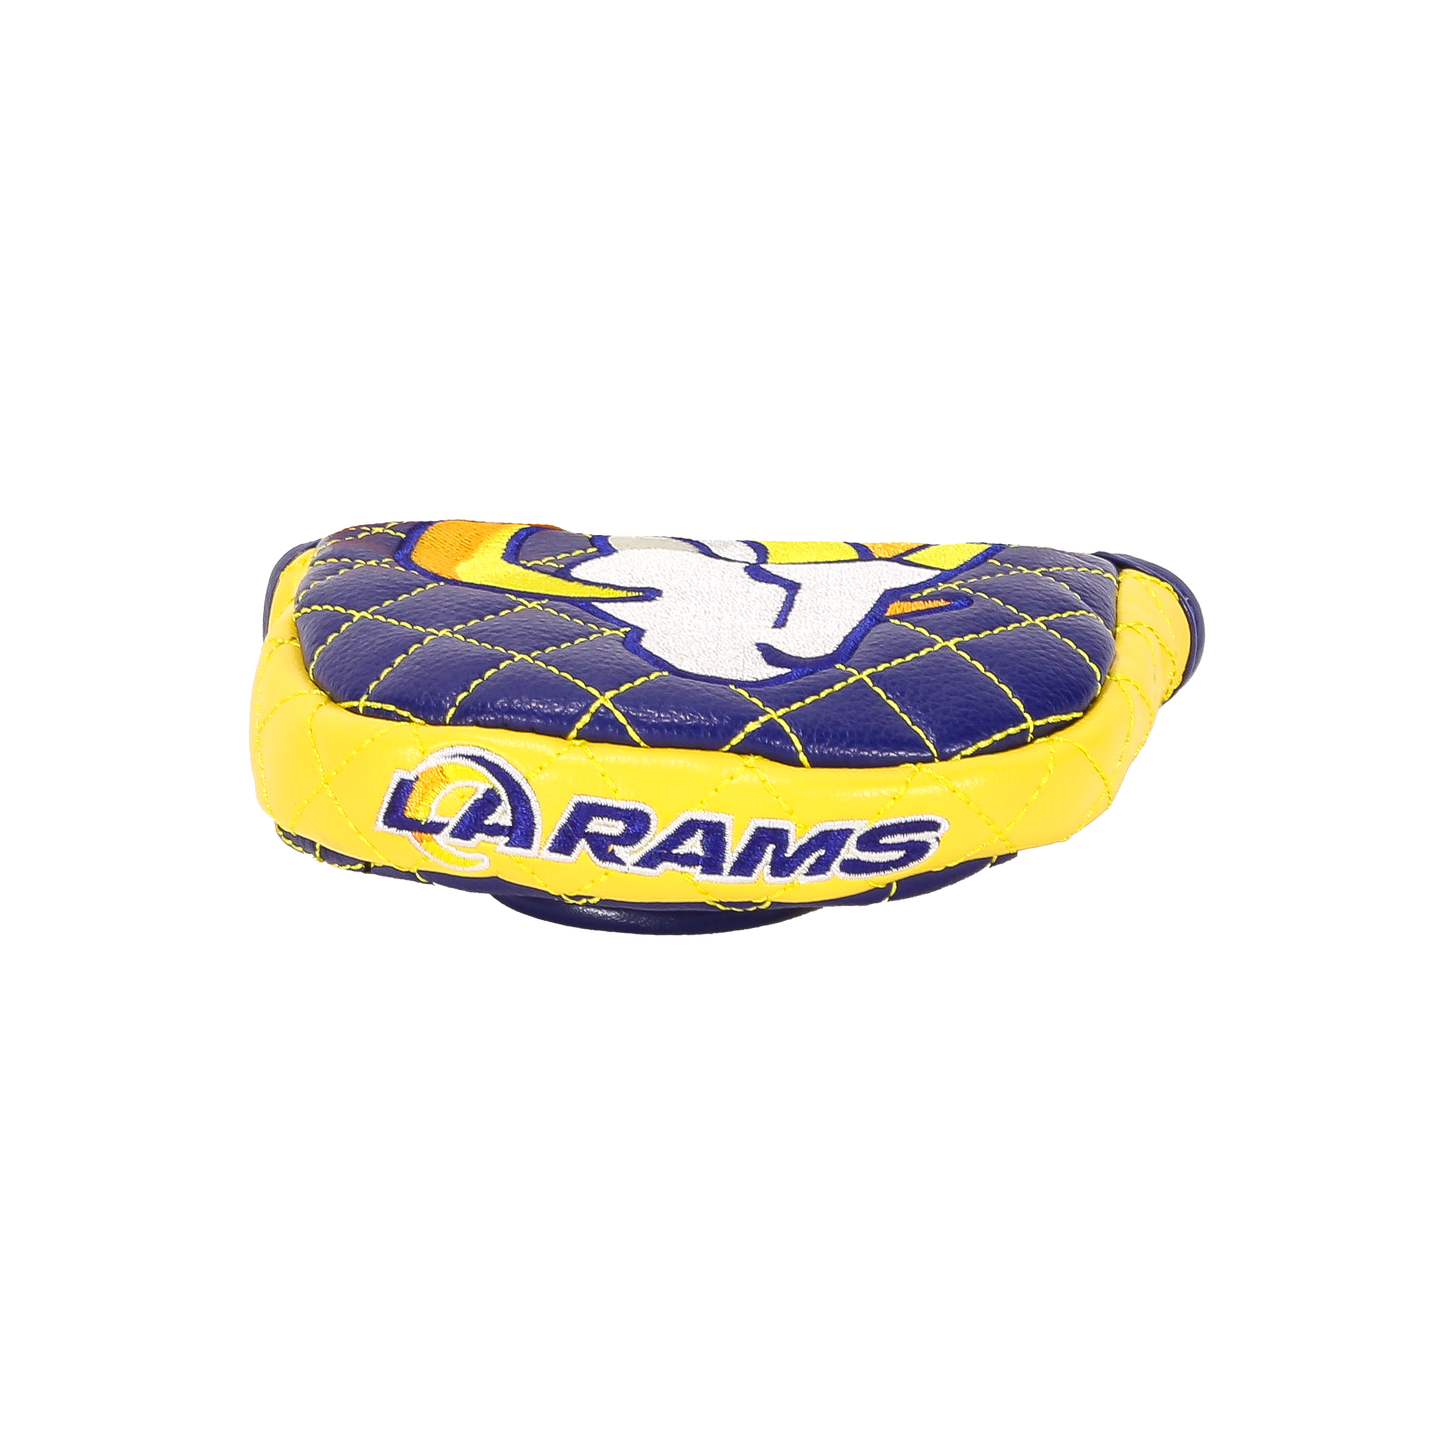 Los Angeles "Rams" Mallet Putter Cover